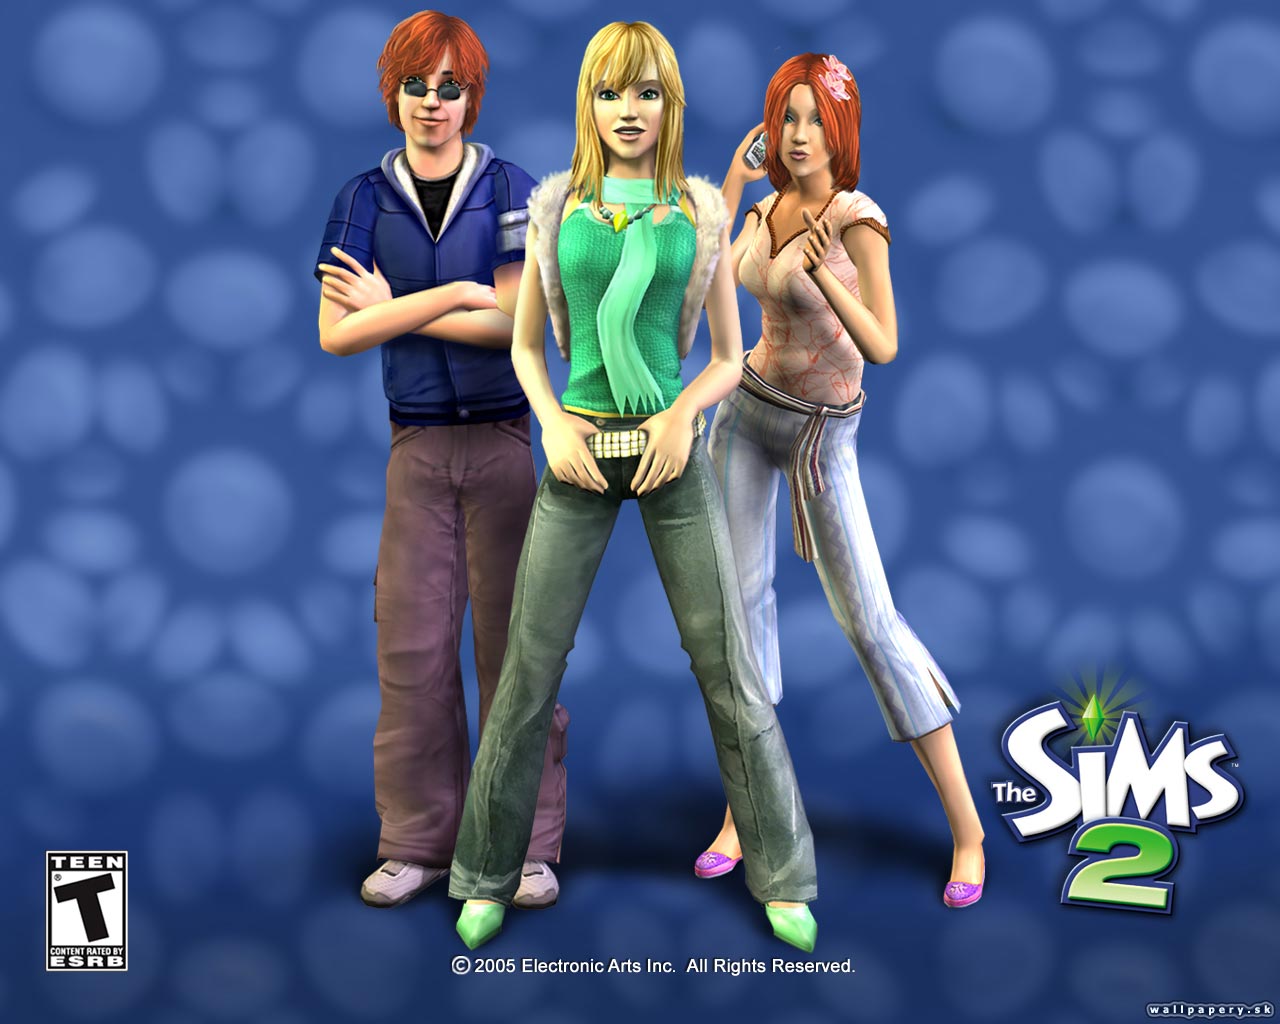 The Sims 2 - wallpaper 28